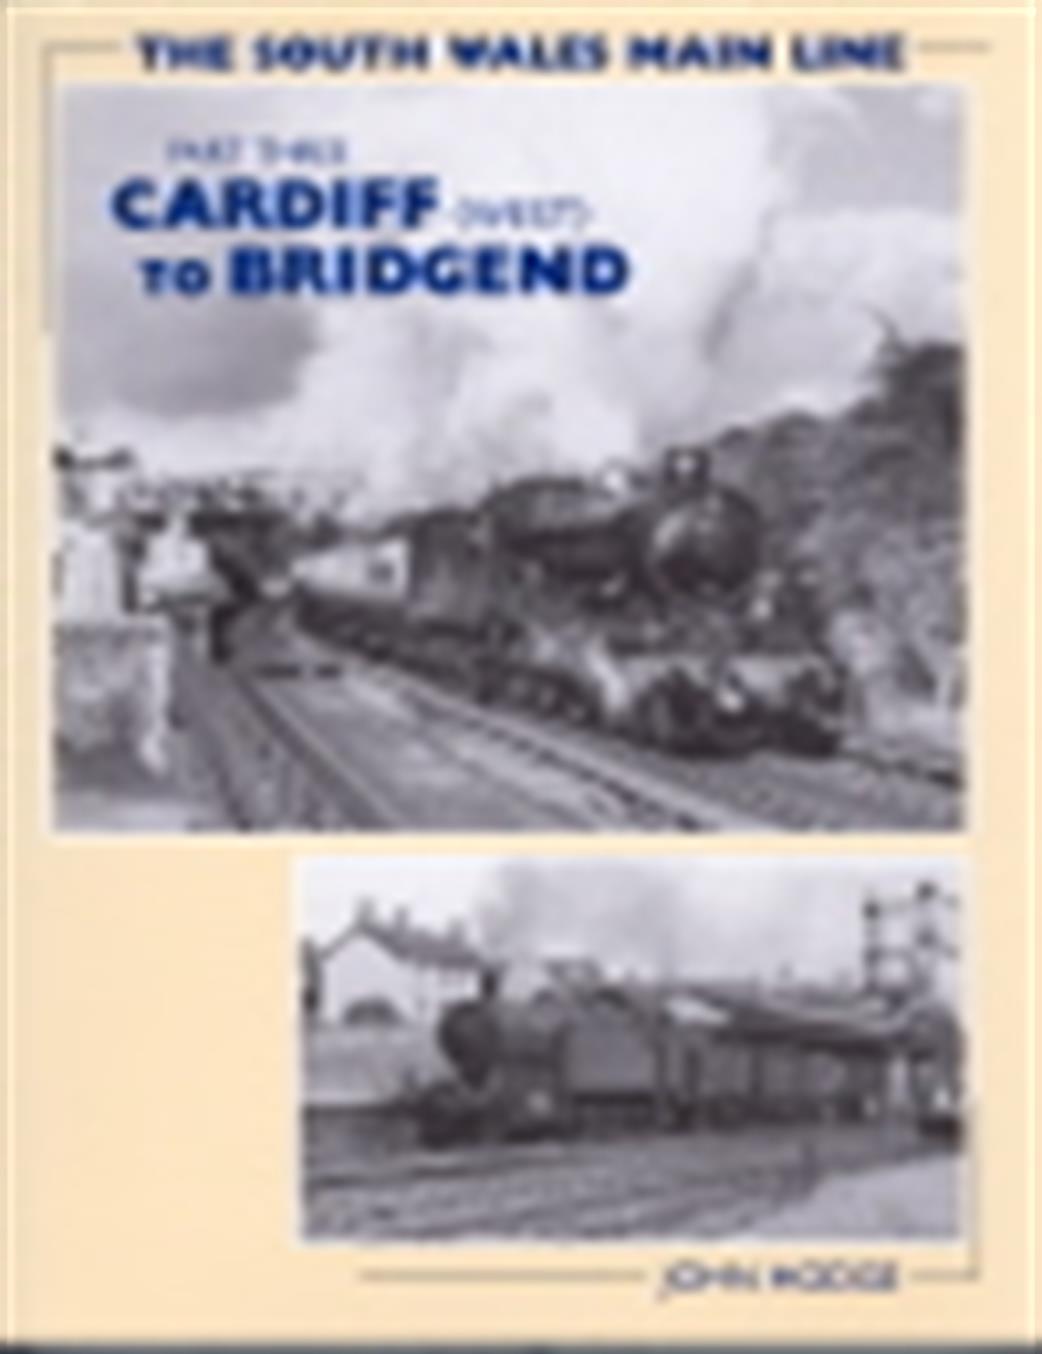 Wild Swan SWmainline3 The South Wales Main Line Part Three Cardiff to Bridgend